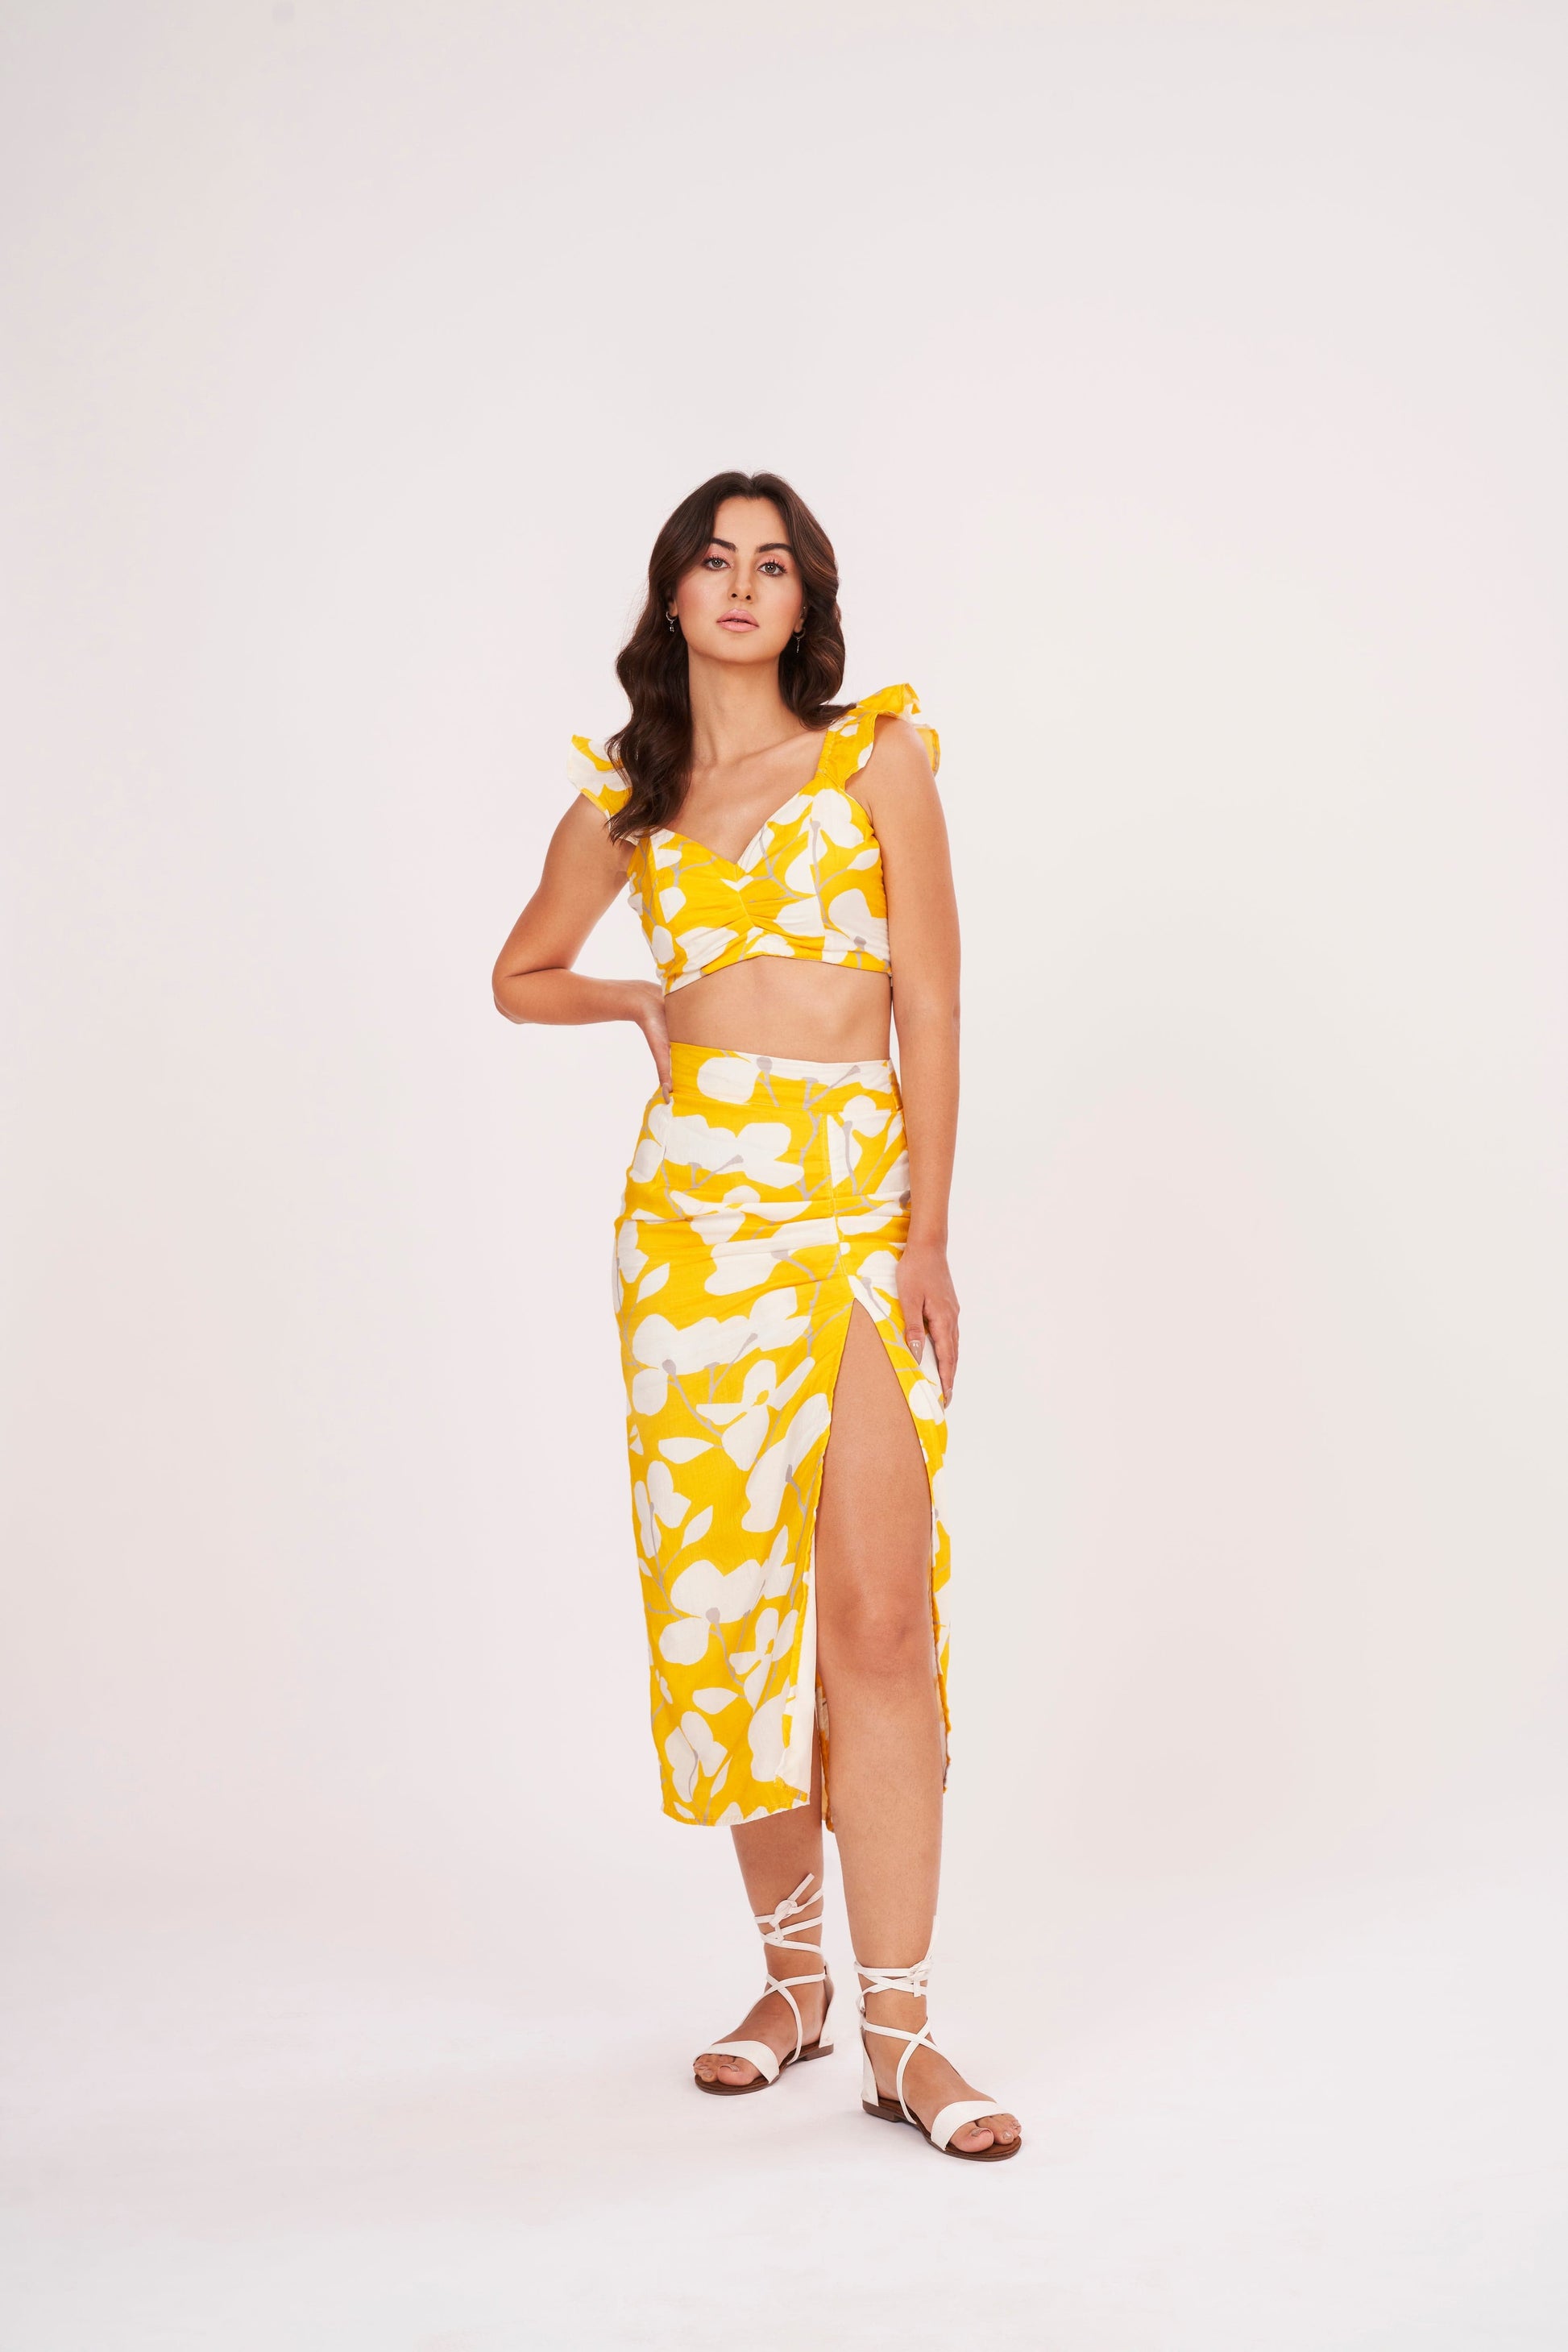 Thigh-length floral skirt with lightweight muslin fabric, ensuring comfort in hot weather. Abstract print exudes sophistication, while trendy cut complements modern appeal.